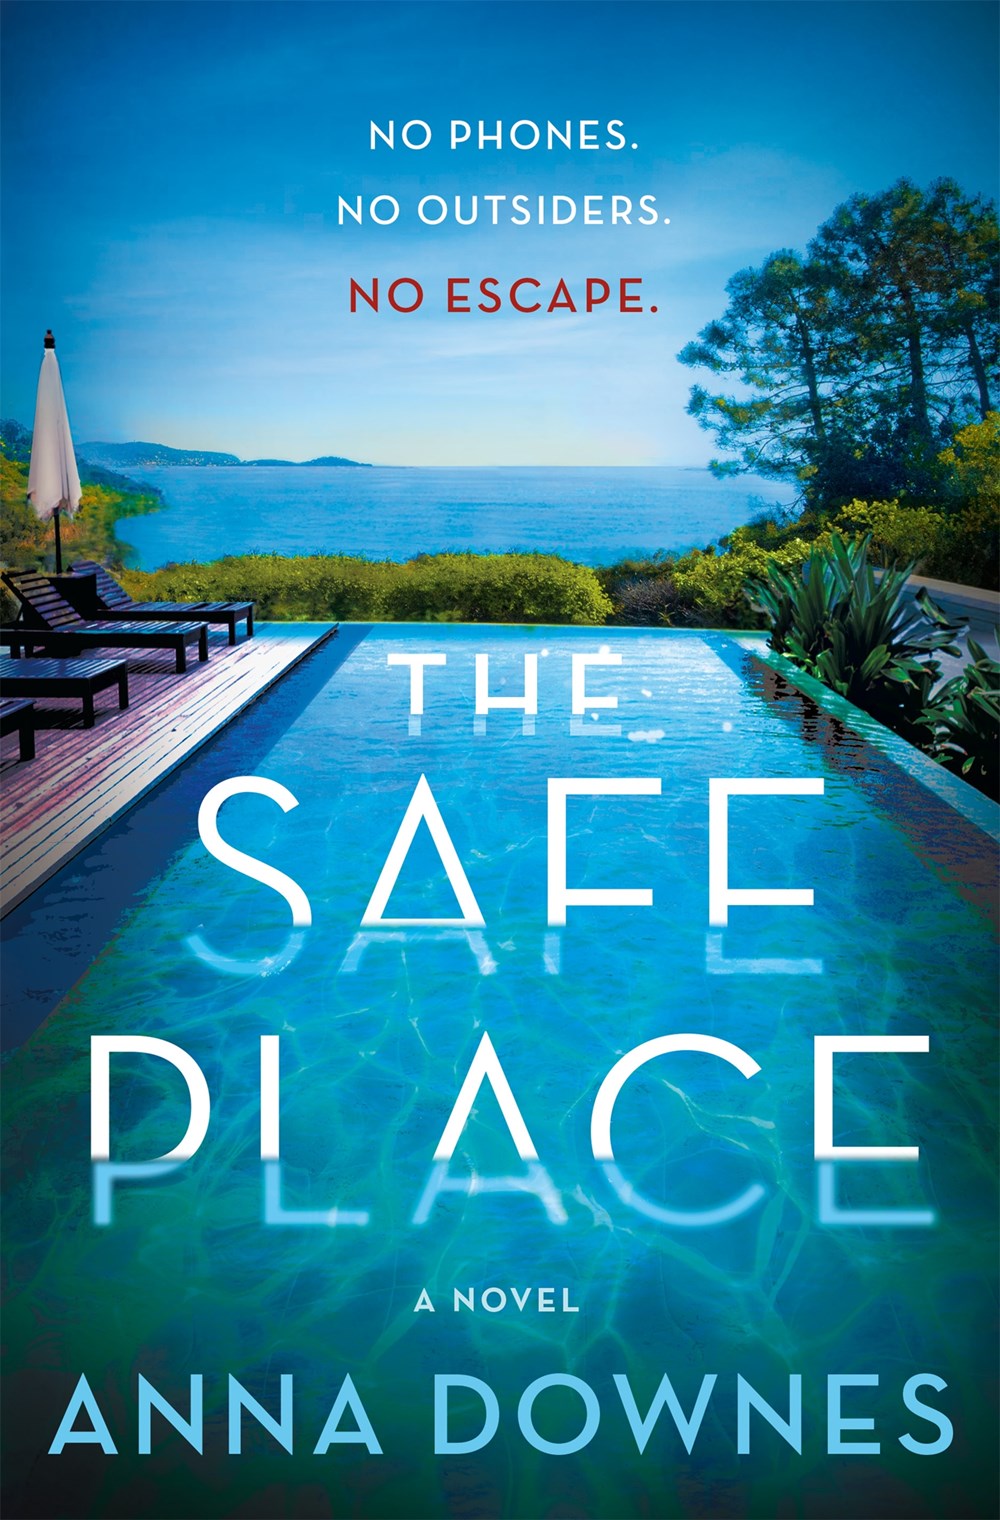 Review: The Safe Place by Anna Downes